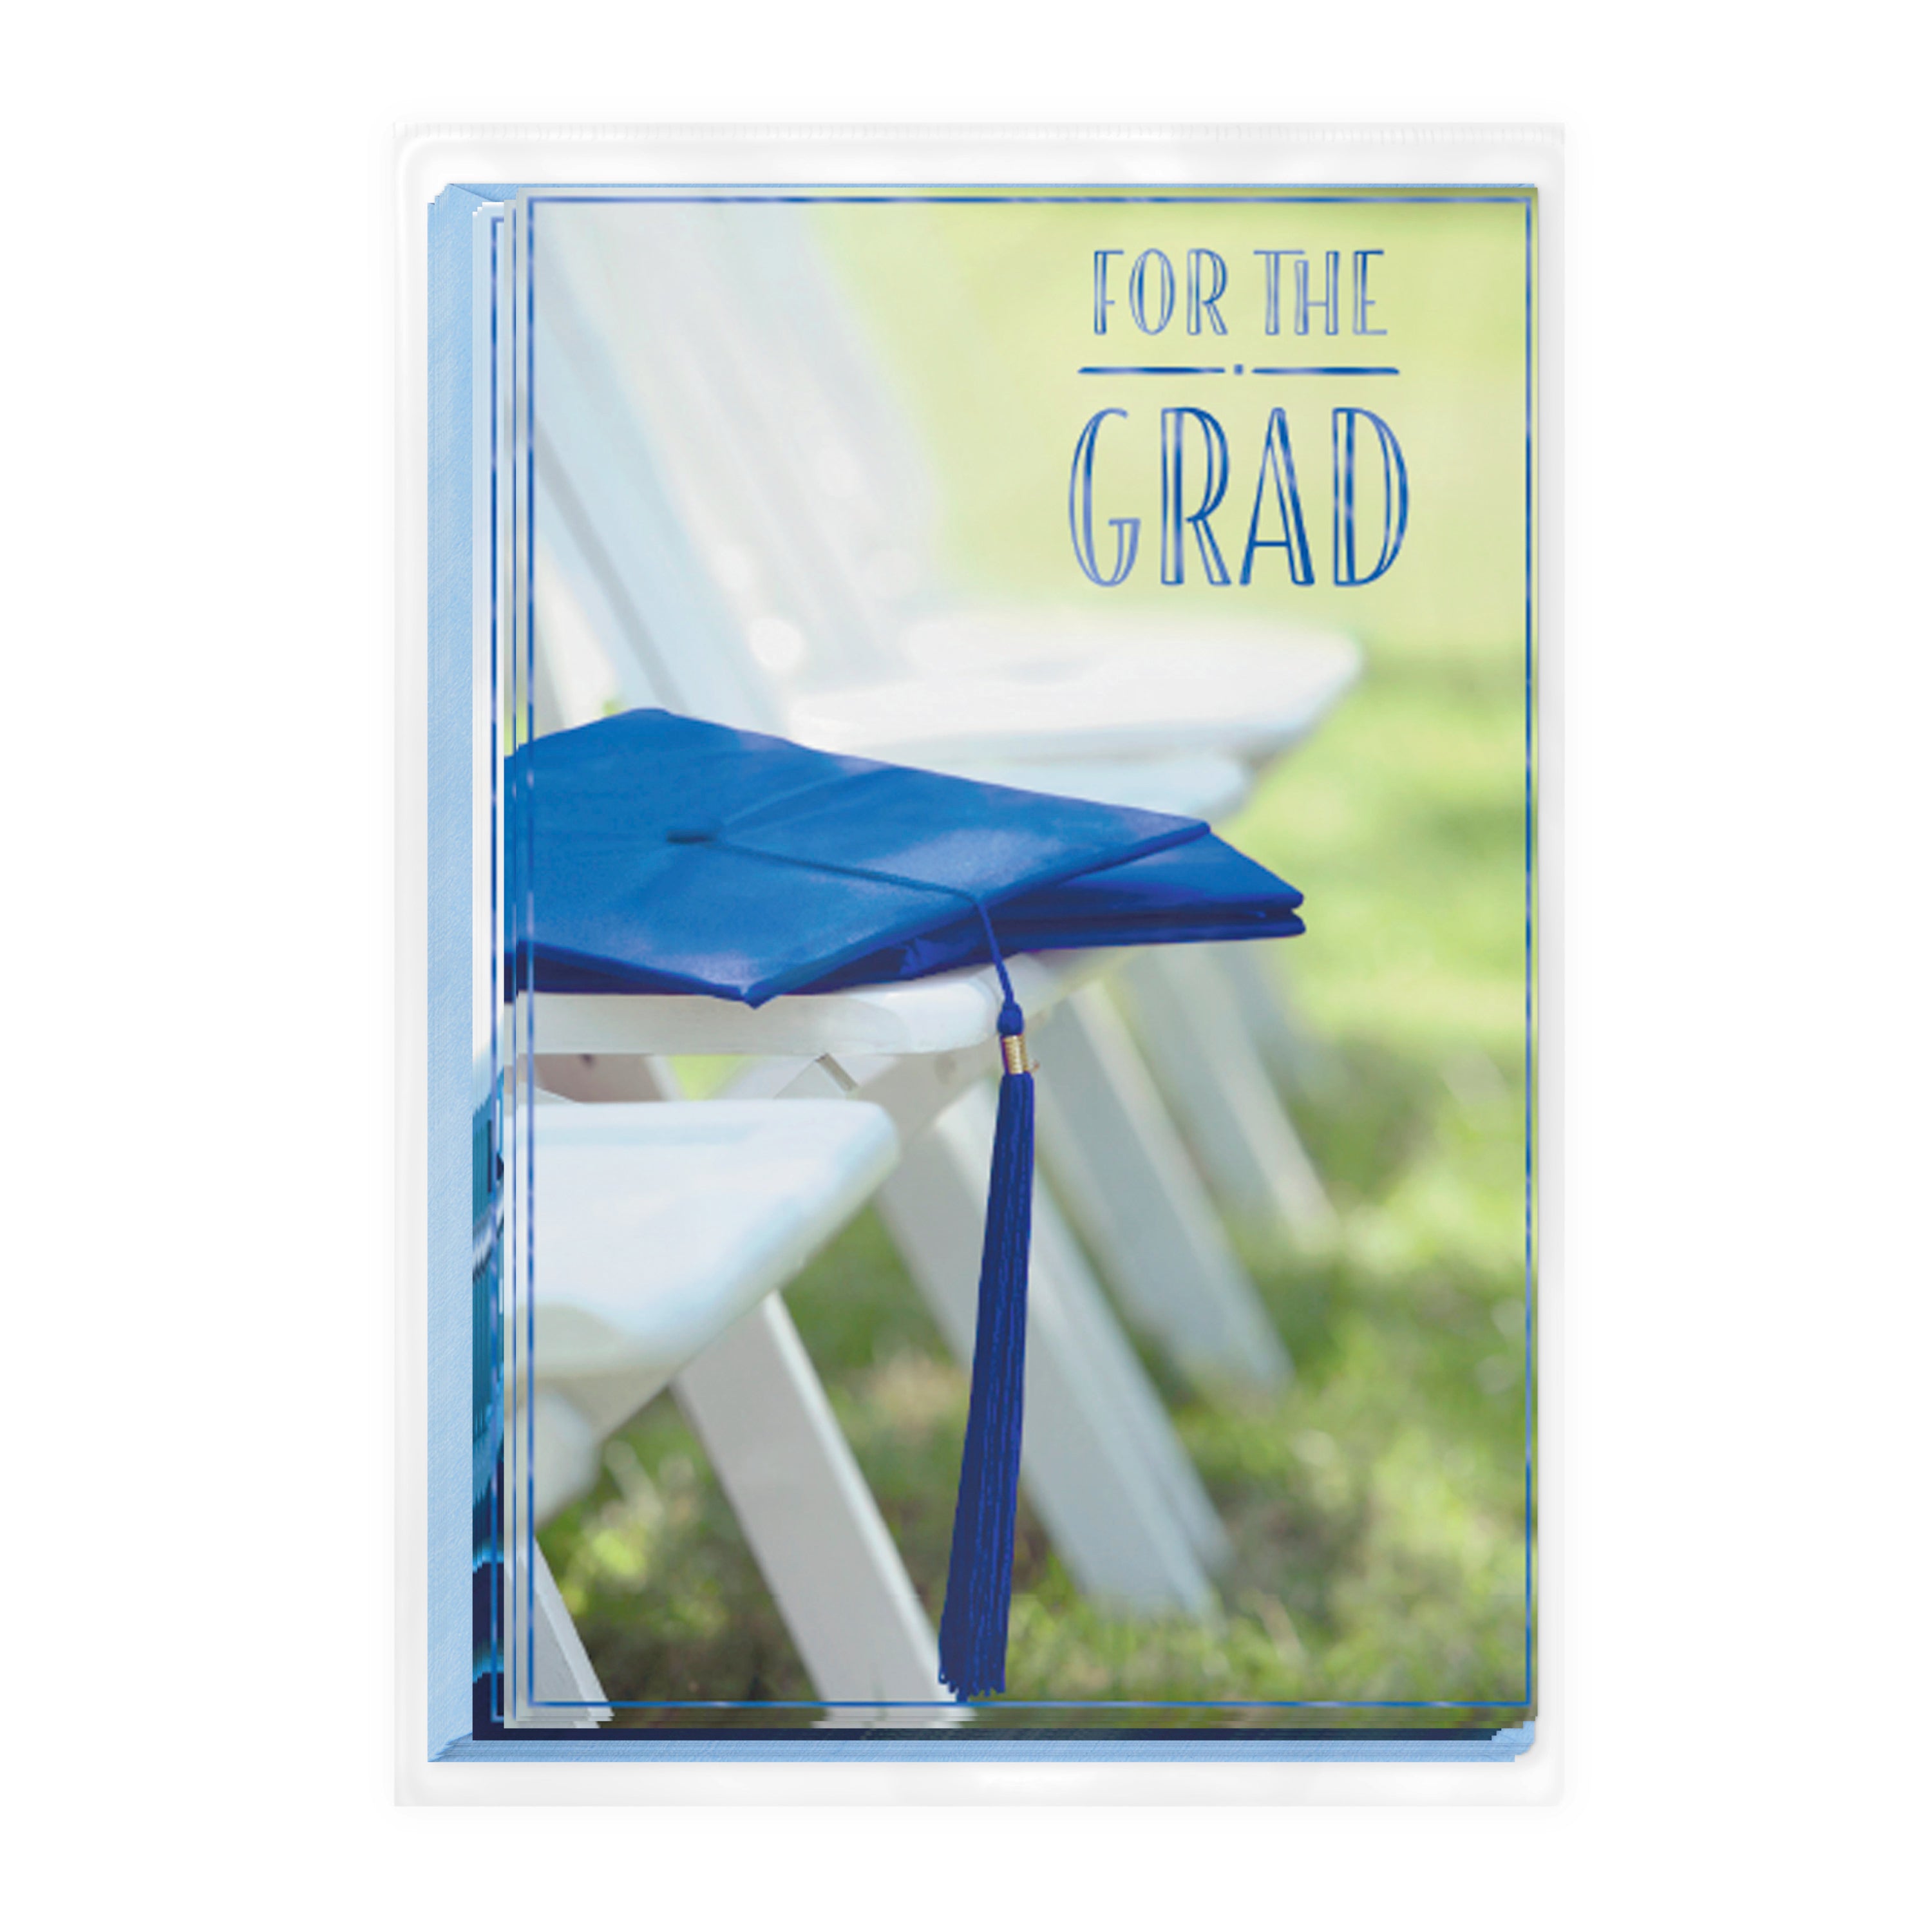 Graduation Cards Assortment, Wishing You Success (6 Cards with Envelopes)